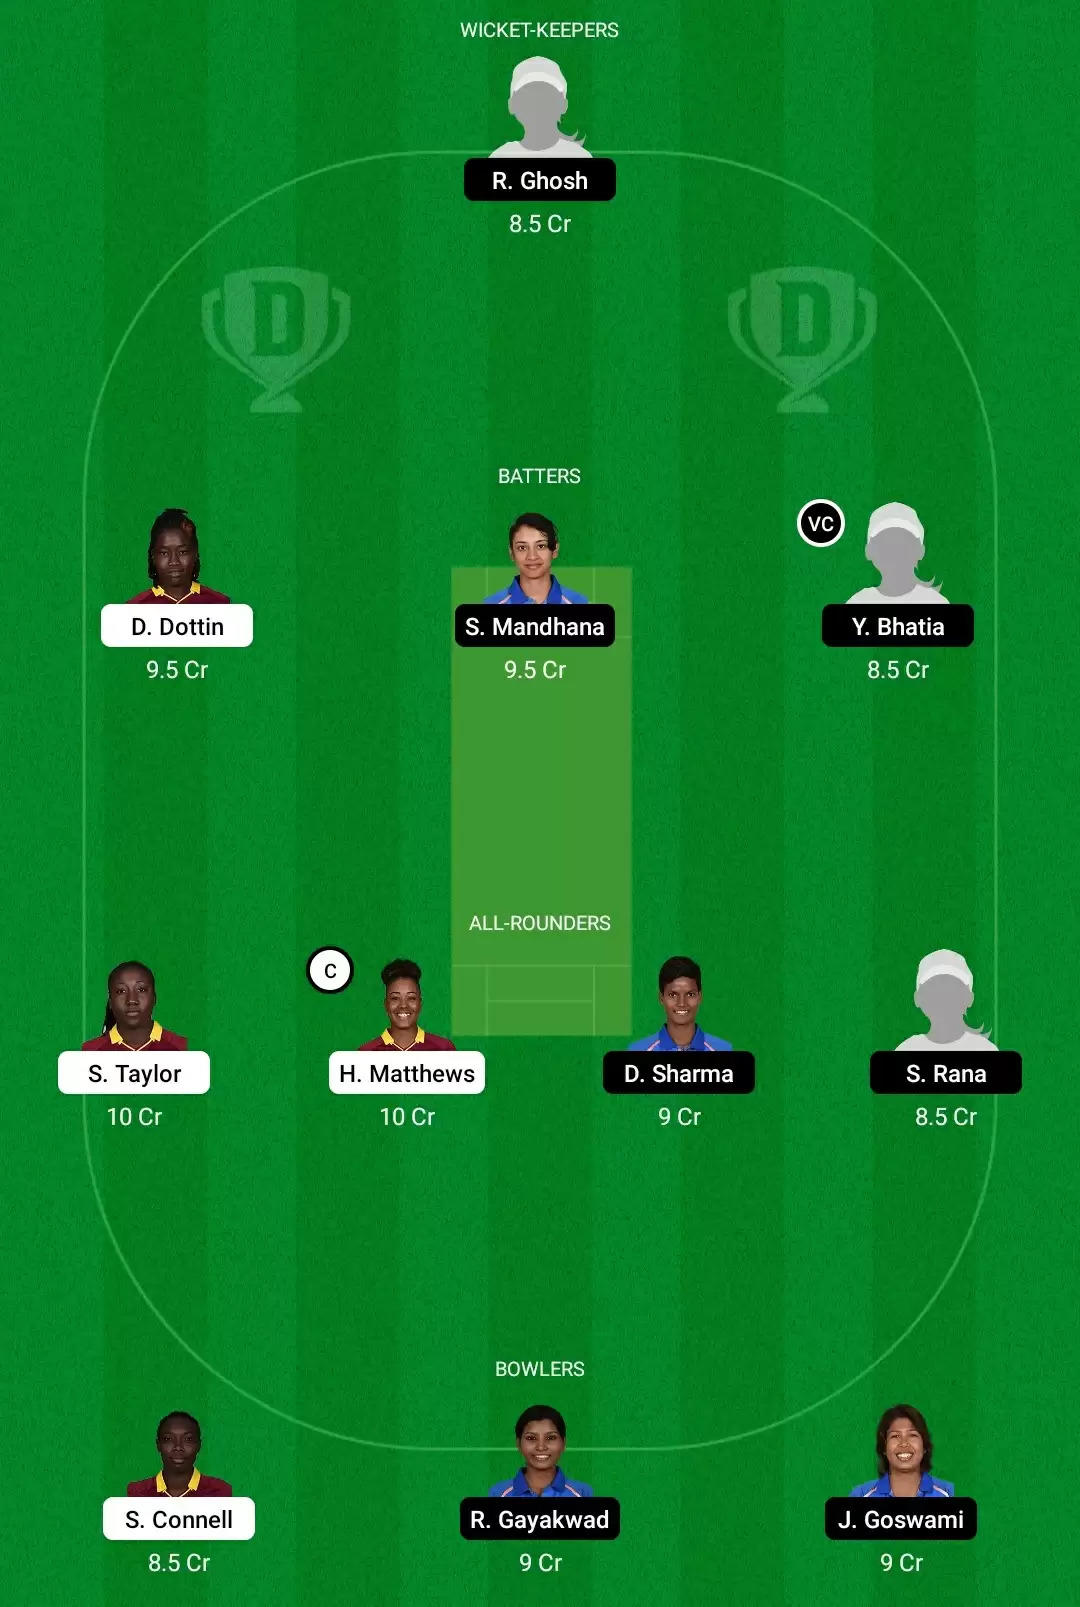 WI-W Vs IN-W Dream11 Prediction, Fantasy Cricket Tips, Playing XI, Dream11 Team, Pitch And Weather Report – West Indies Women Vs India Women Match, ICC Women’s World Cup 2022